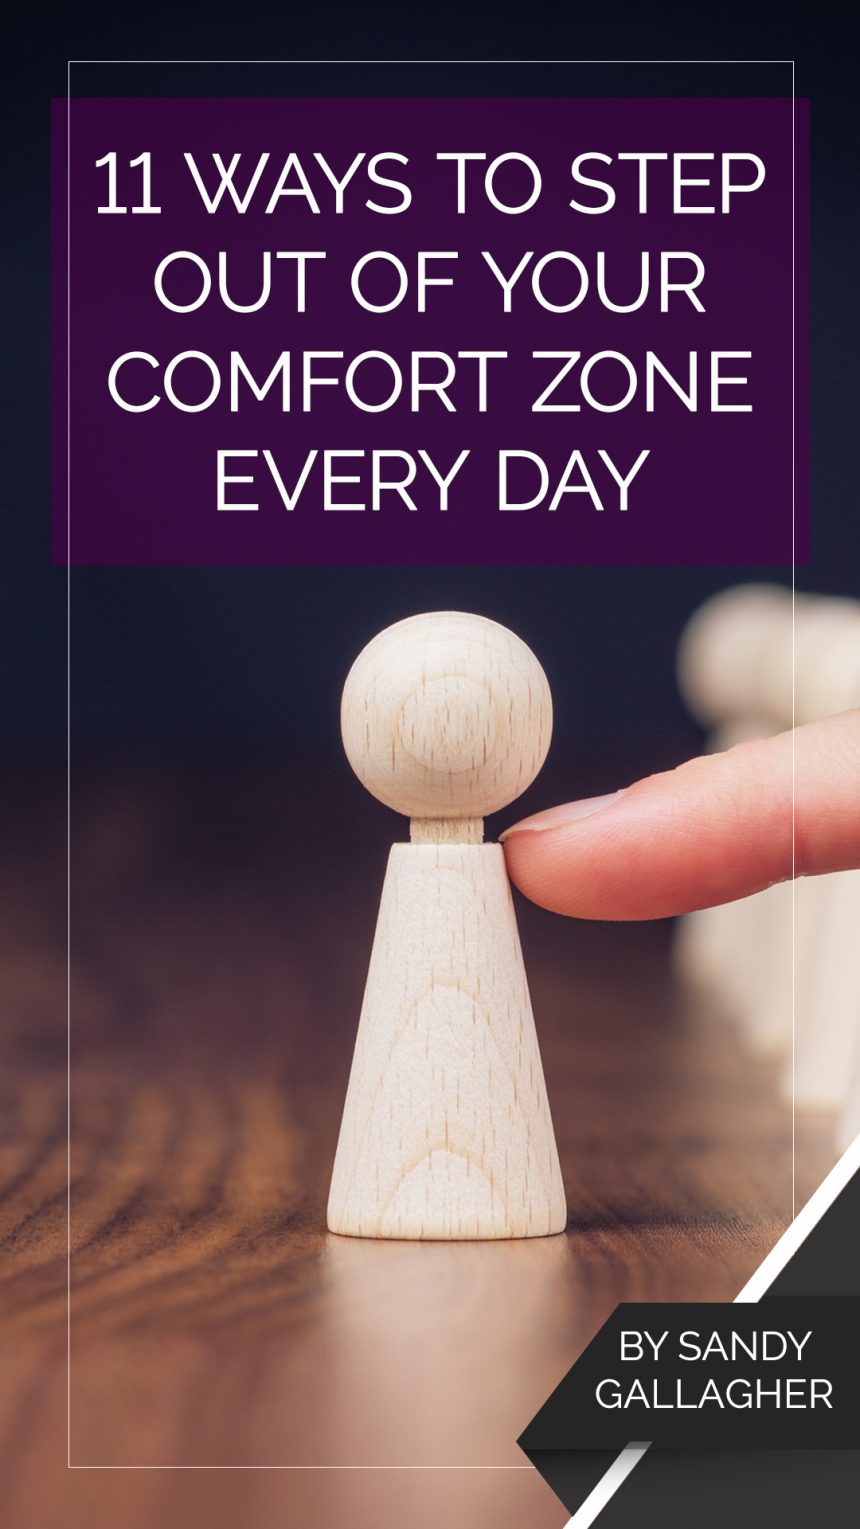 11-ways-to-step-out-of-your-comfort-zone-every-day-IG